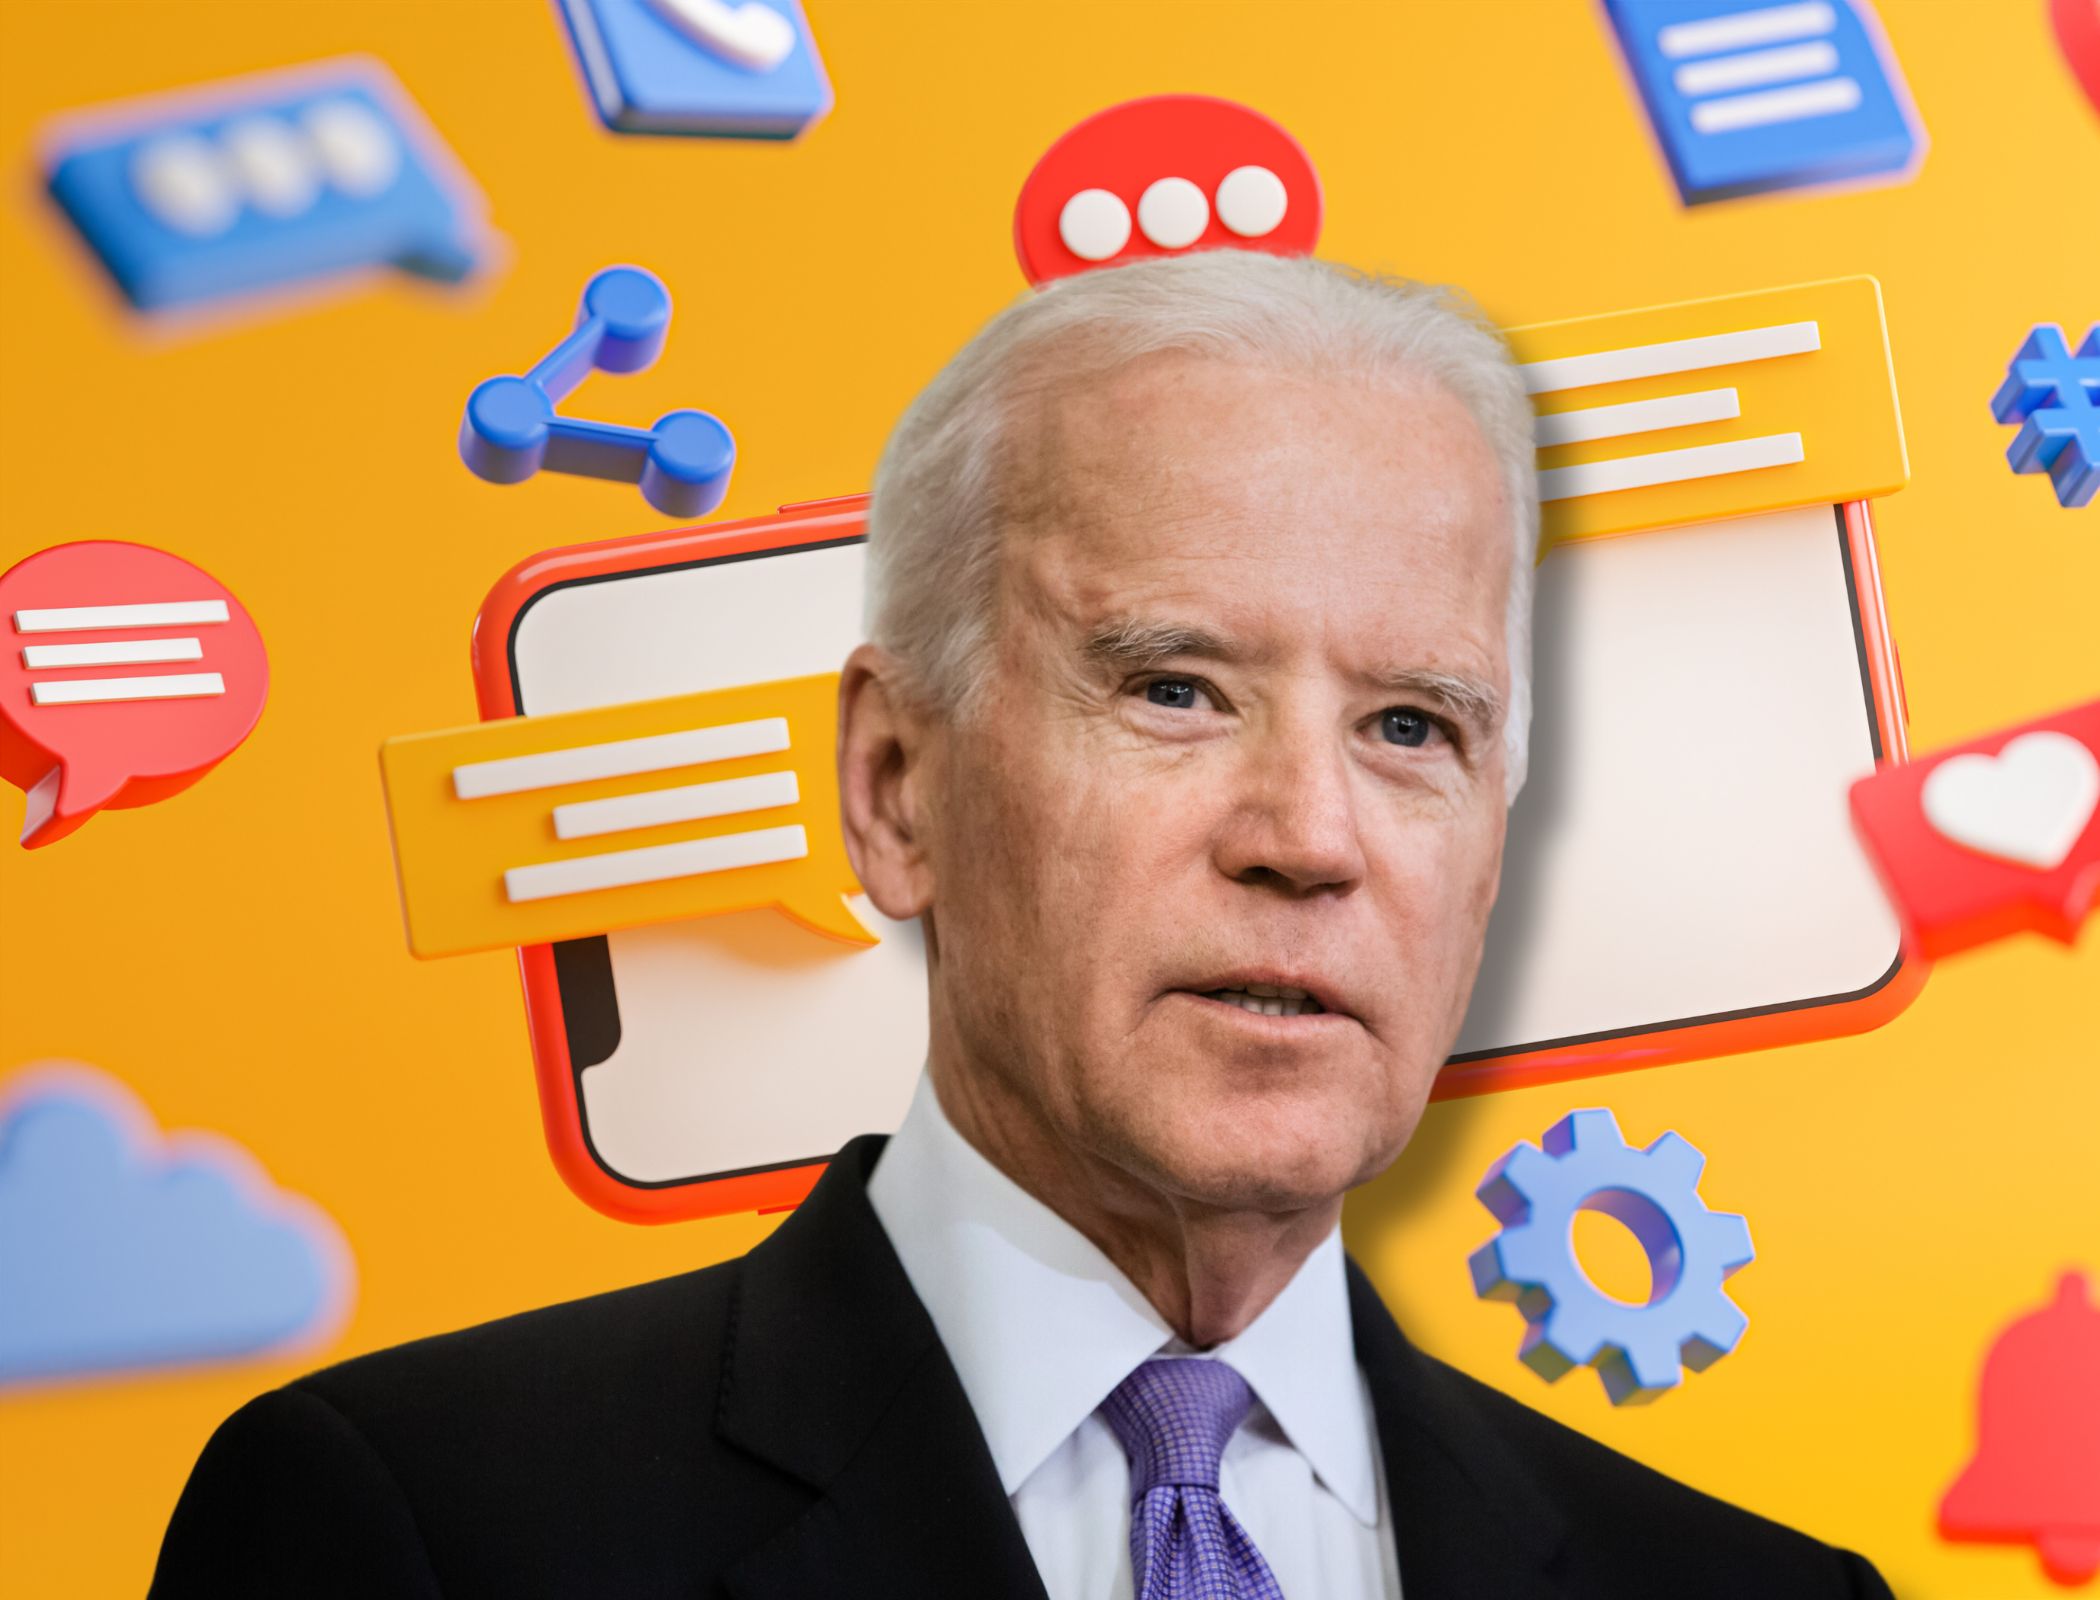 Biden officials should restrict contact with social media firms, judge rules